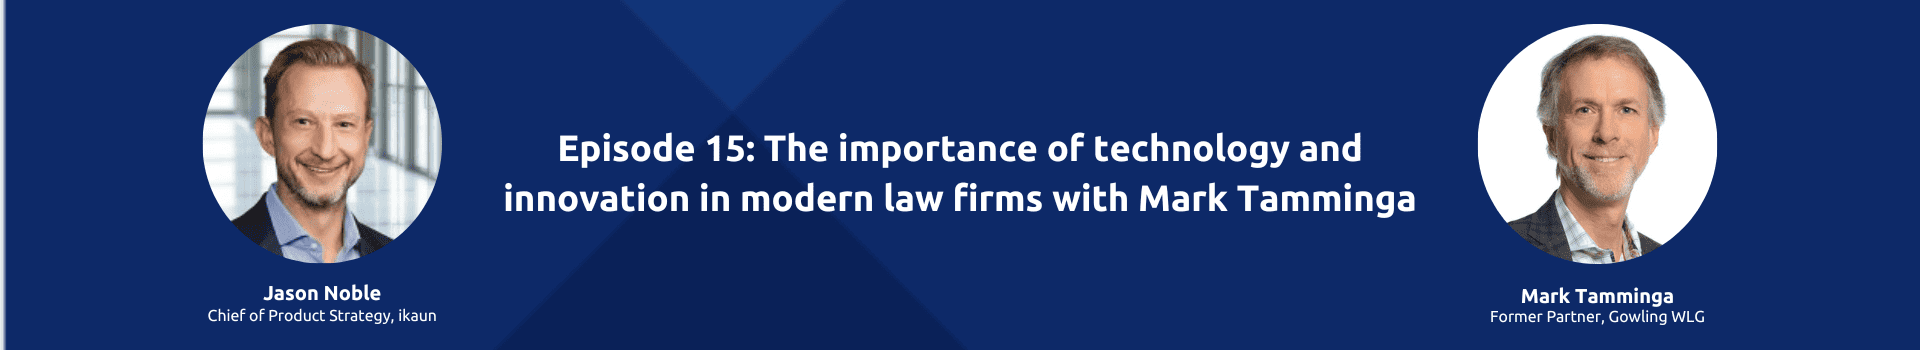 The importance of technology and innovation in modern law firms with Mark Tamminga